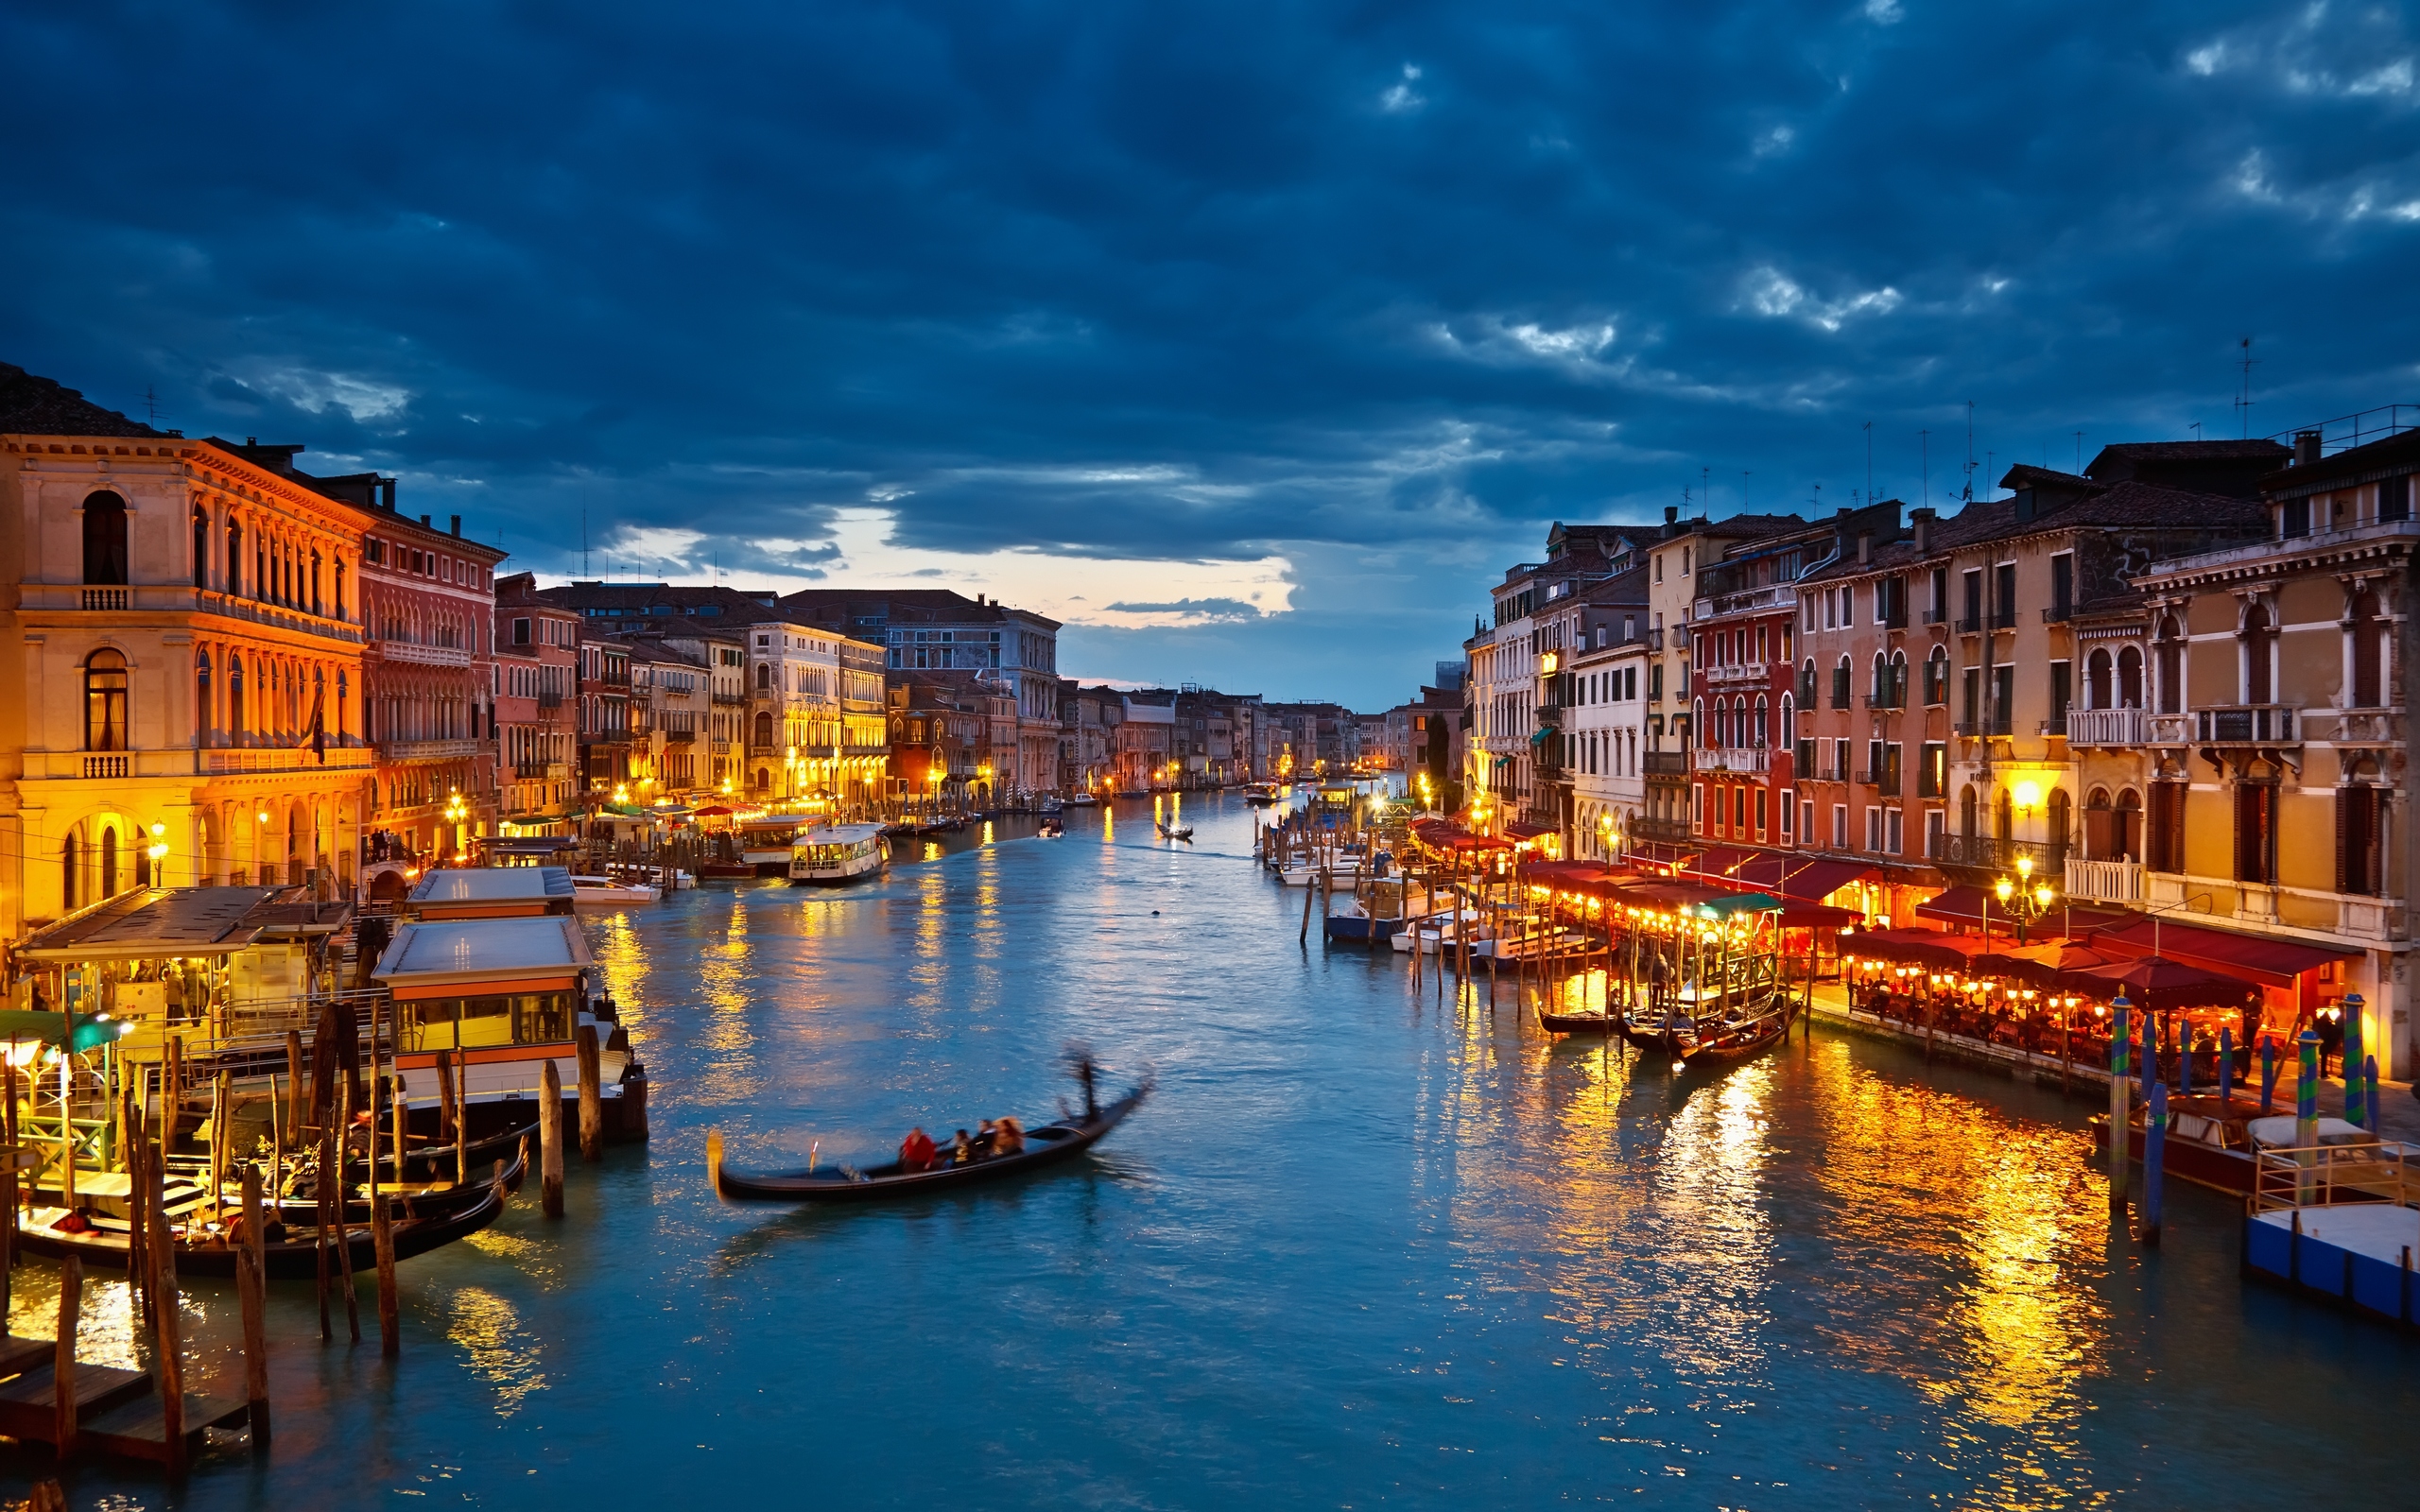 Photos and Images of Venice